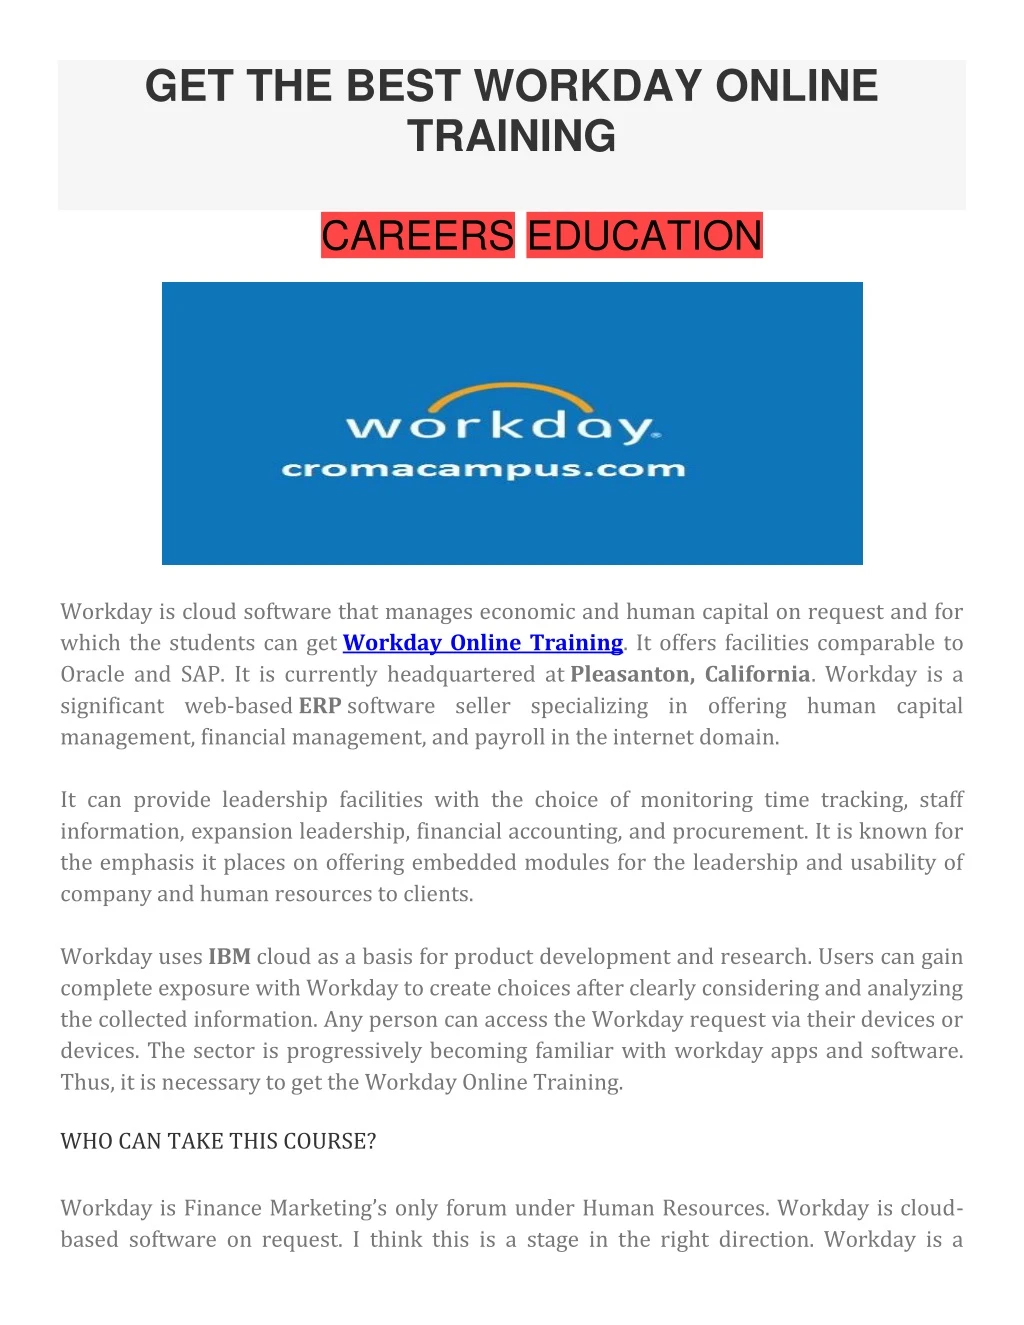 get the best workday online training careers